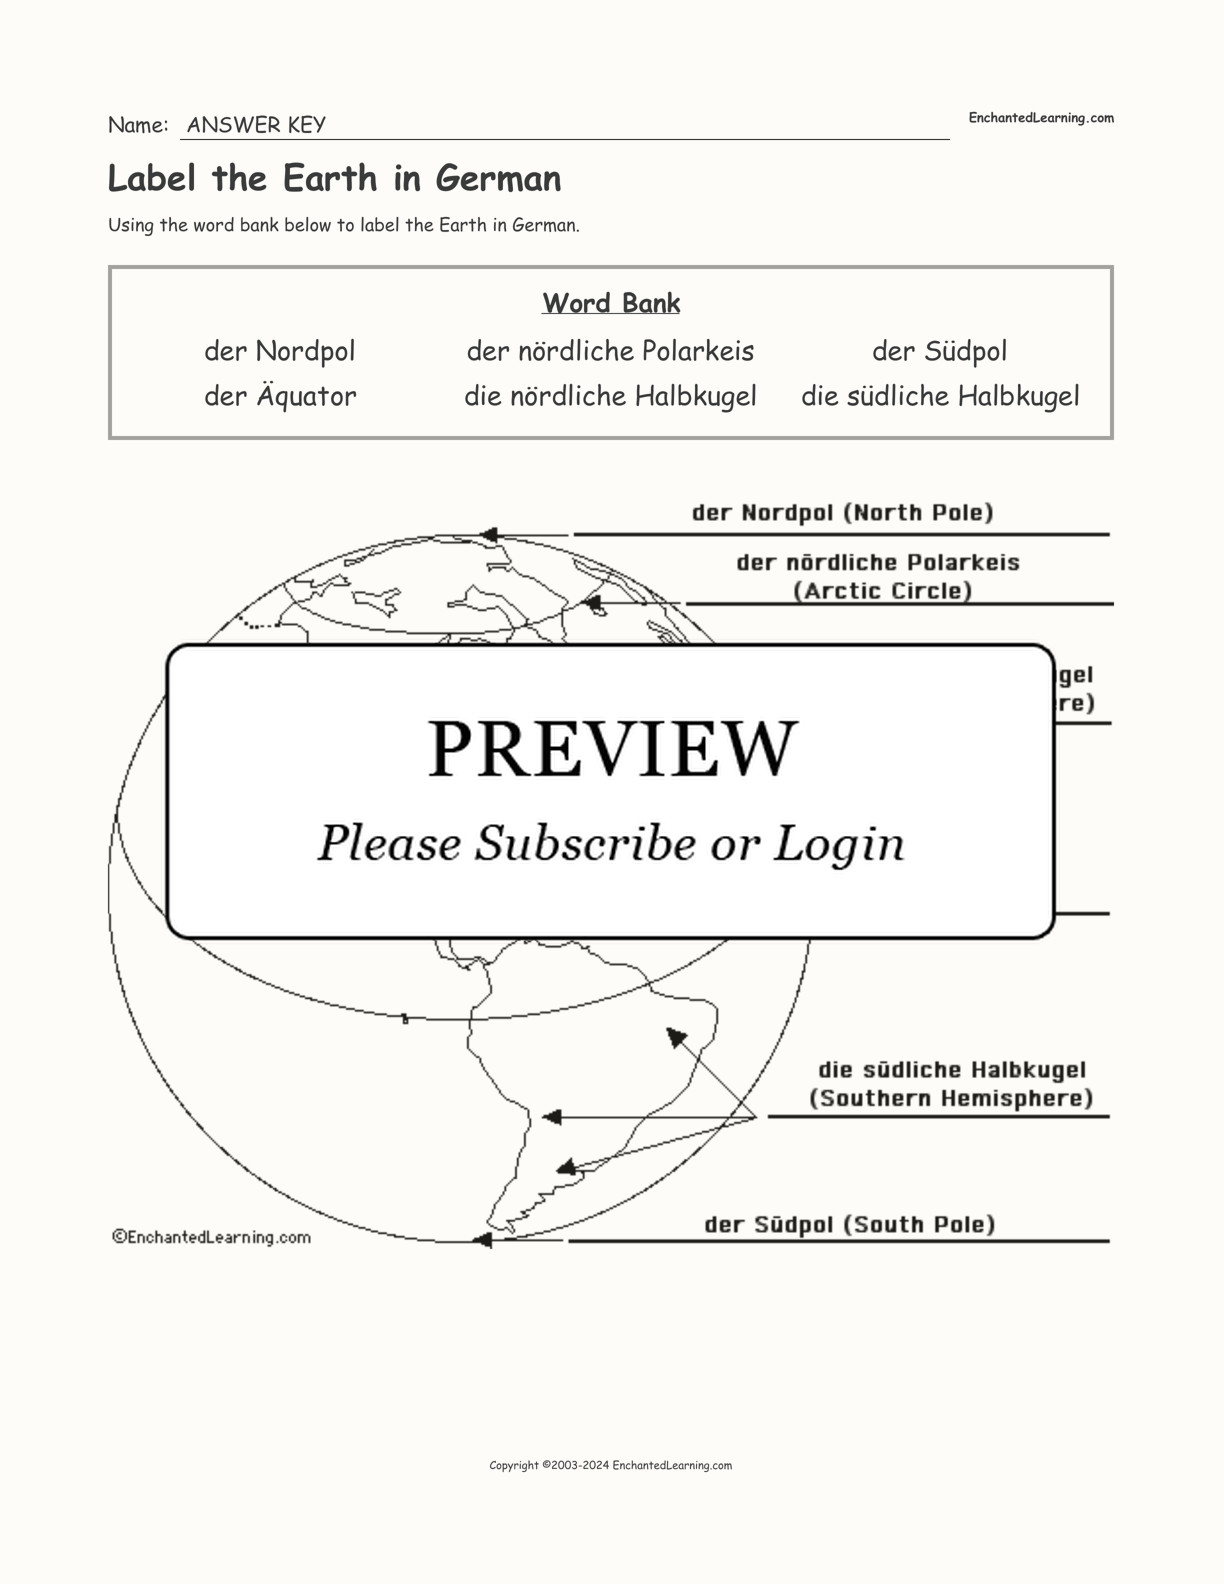 Label the Earth in German interactive worksheet page 2